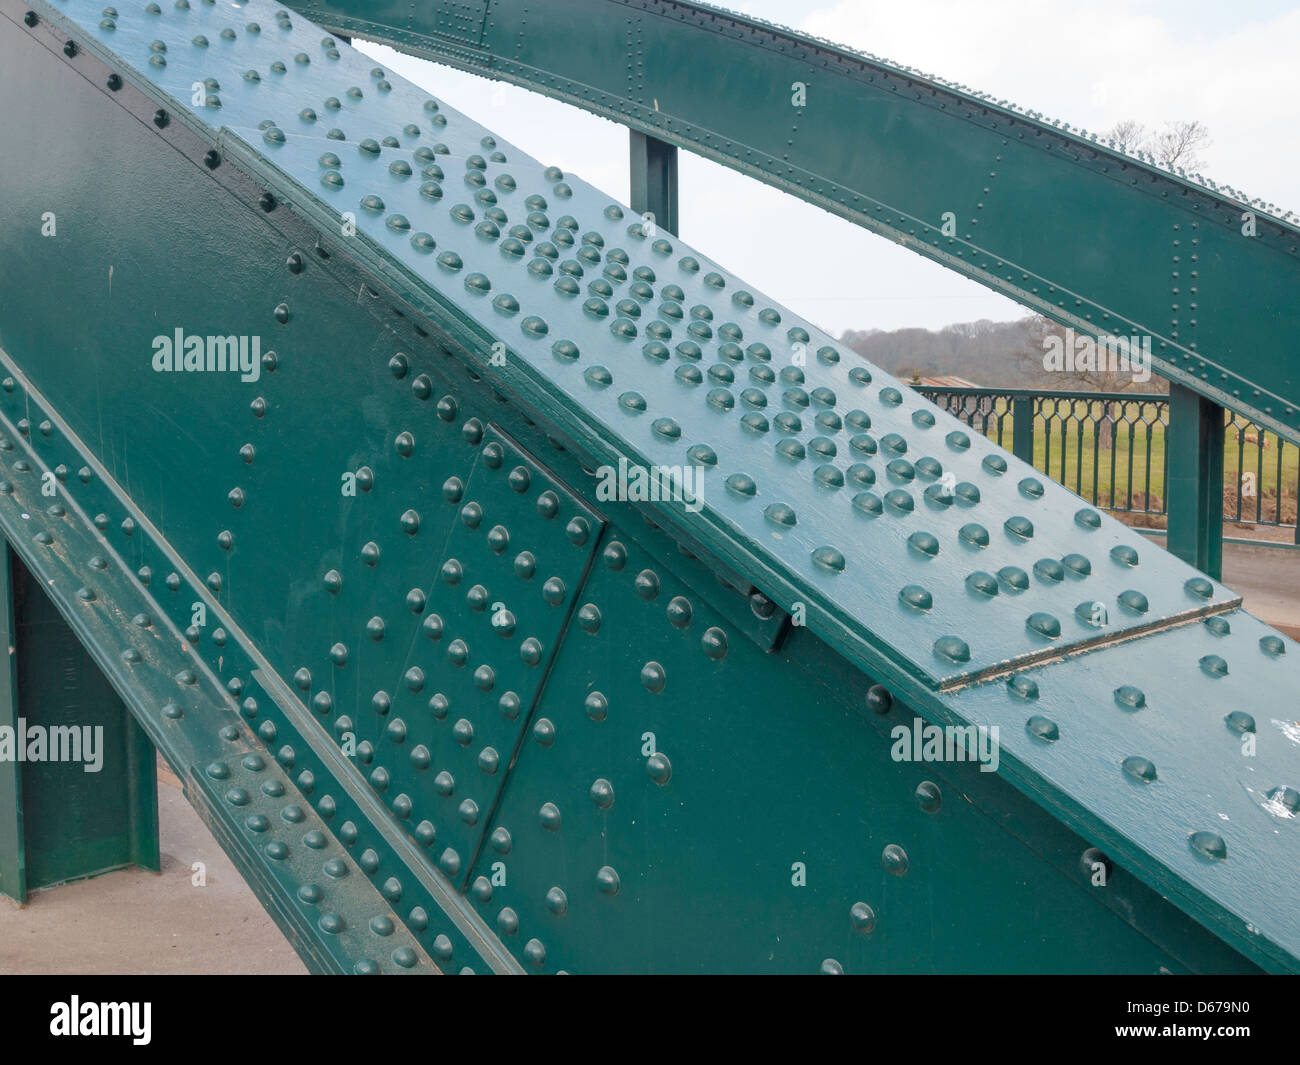 Steel bridge over the River Esk at Ruswarp showing riveted construction typical of the 1930's before welding was introduced Stock Photo